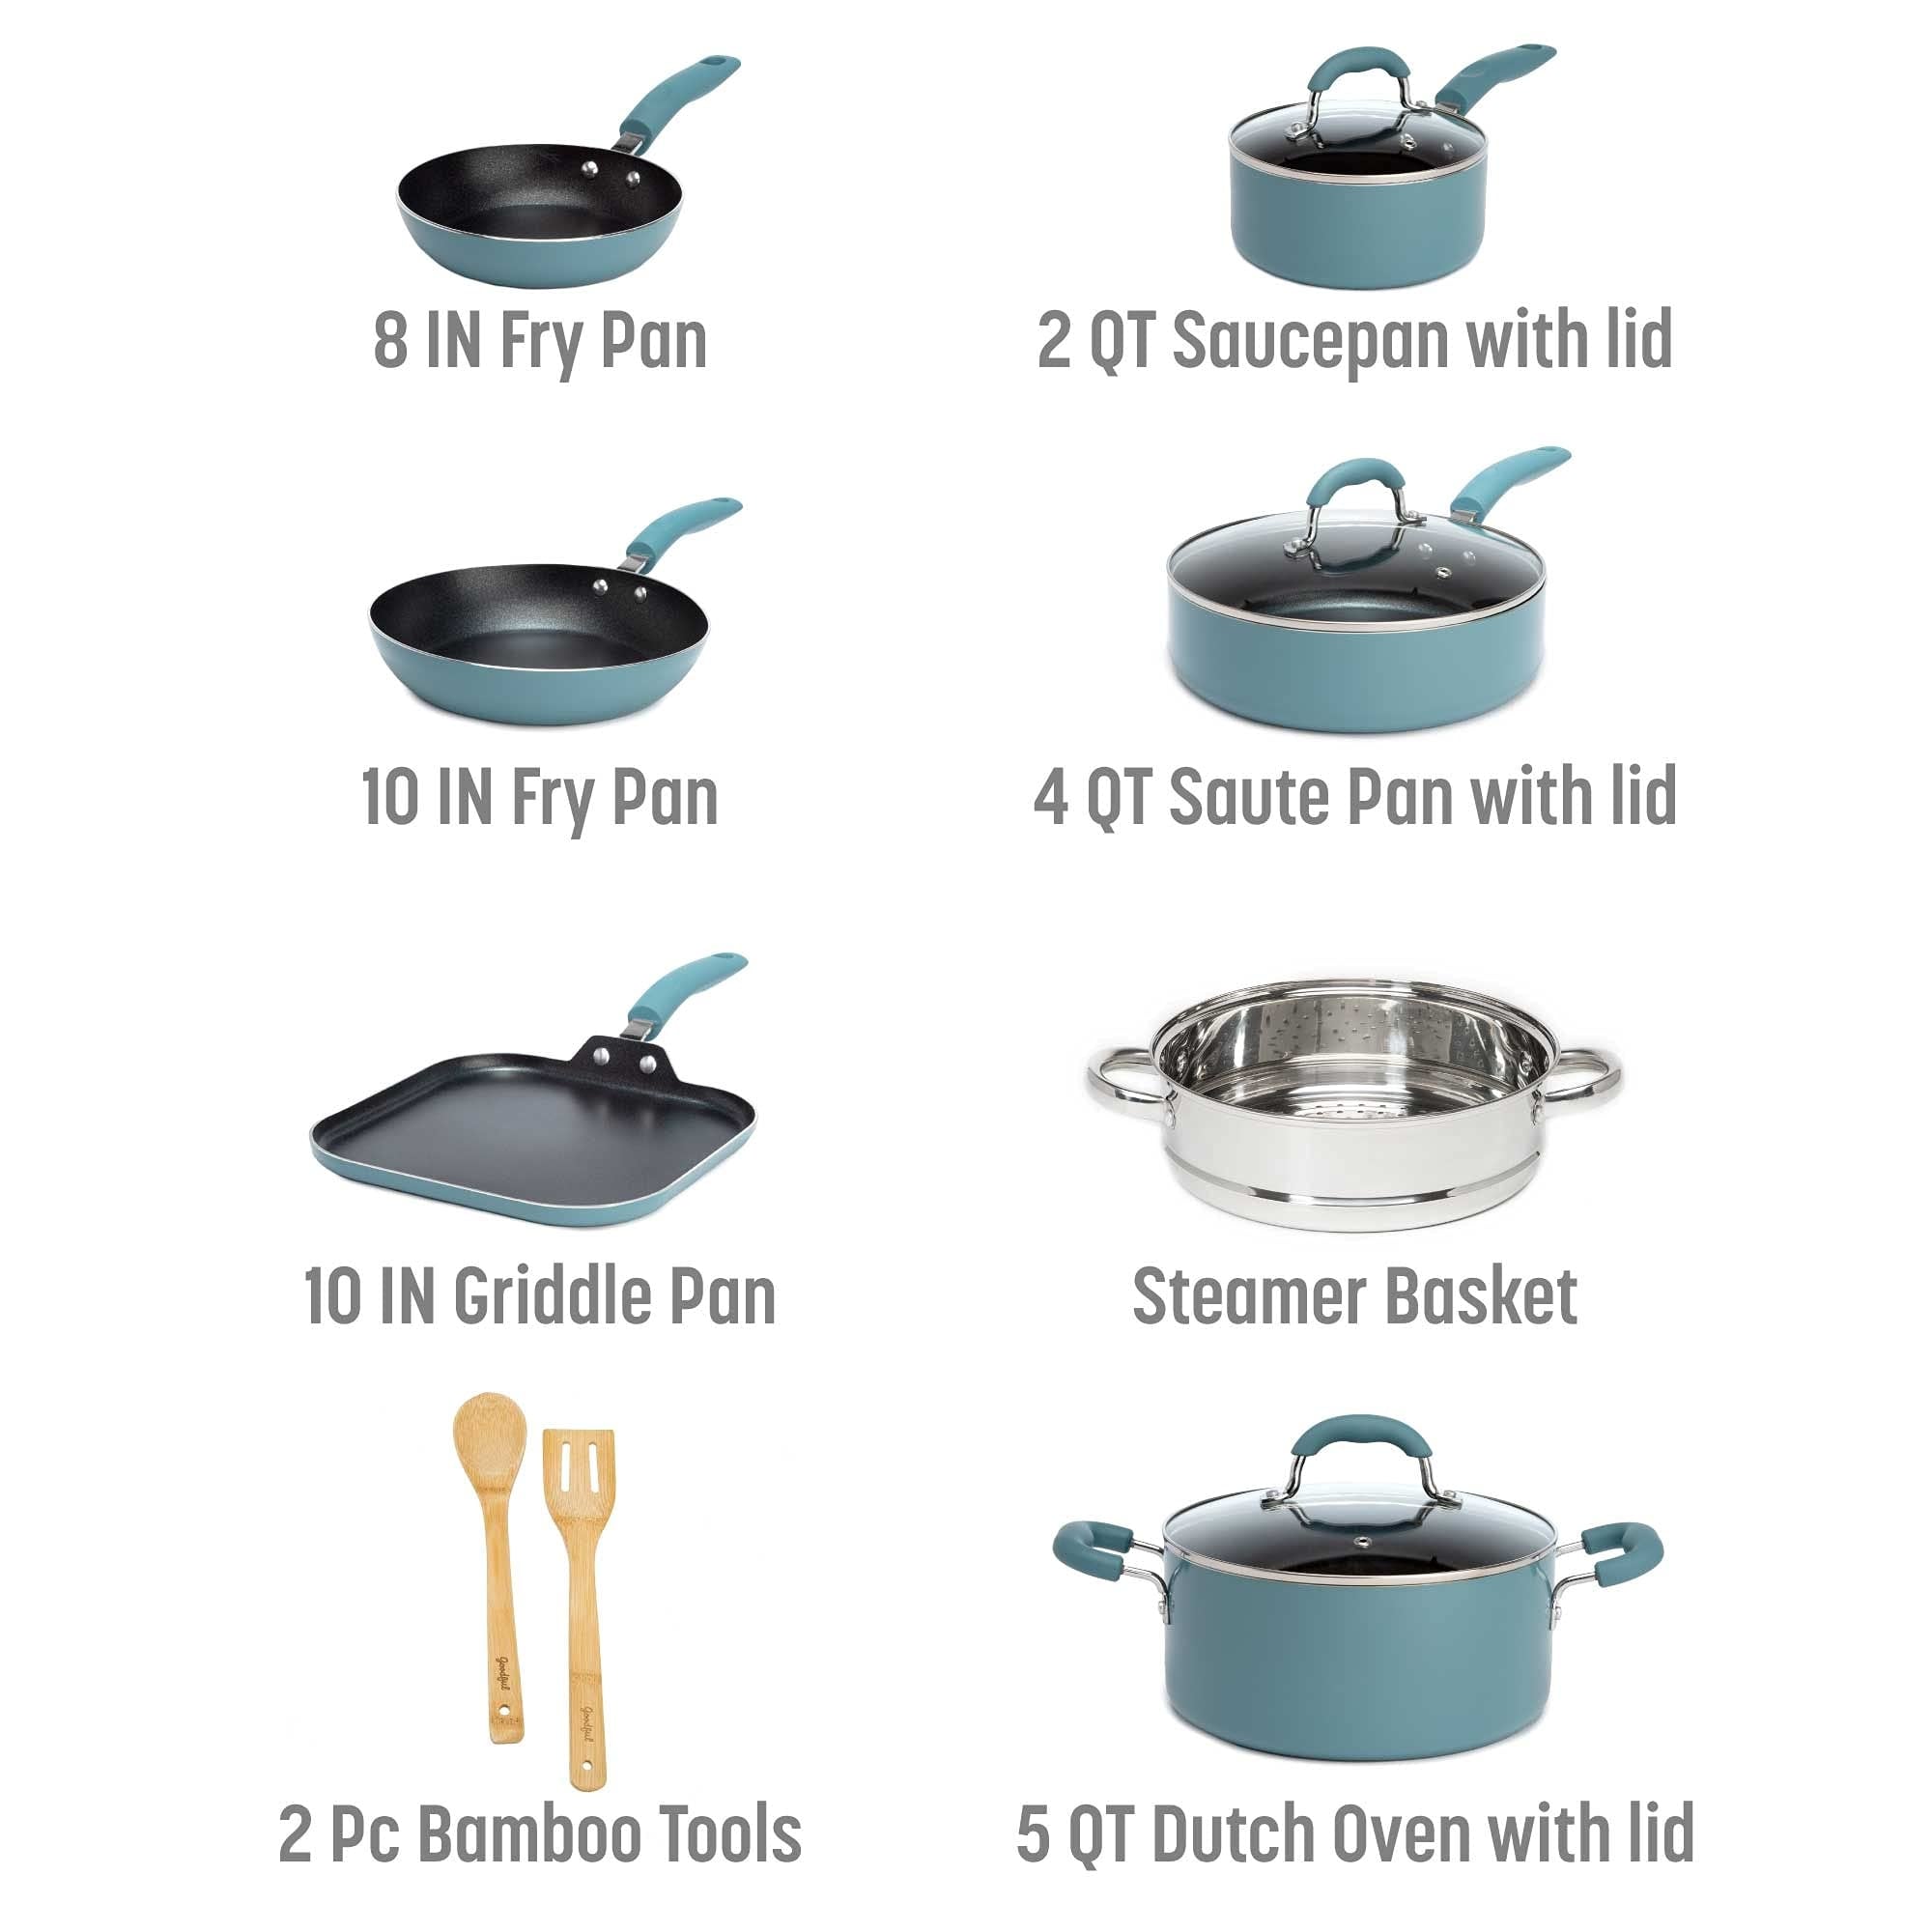 https://ak1.ostkcdn.com/images/products/is/images/direct/253b6965c686056ef85c3bb6793ee5b4c785d521/Cookware-Set-with-Premium-Non-Stick-Coating%2C-Dishwasher-Safe-Pots-and-Pans%2C-Tempered-Glass-Steam-Vented-Lids%2C-12-Piece.jpg